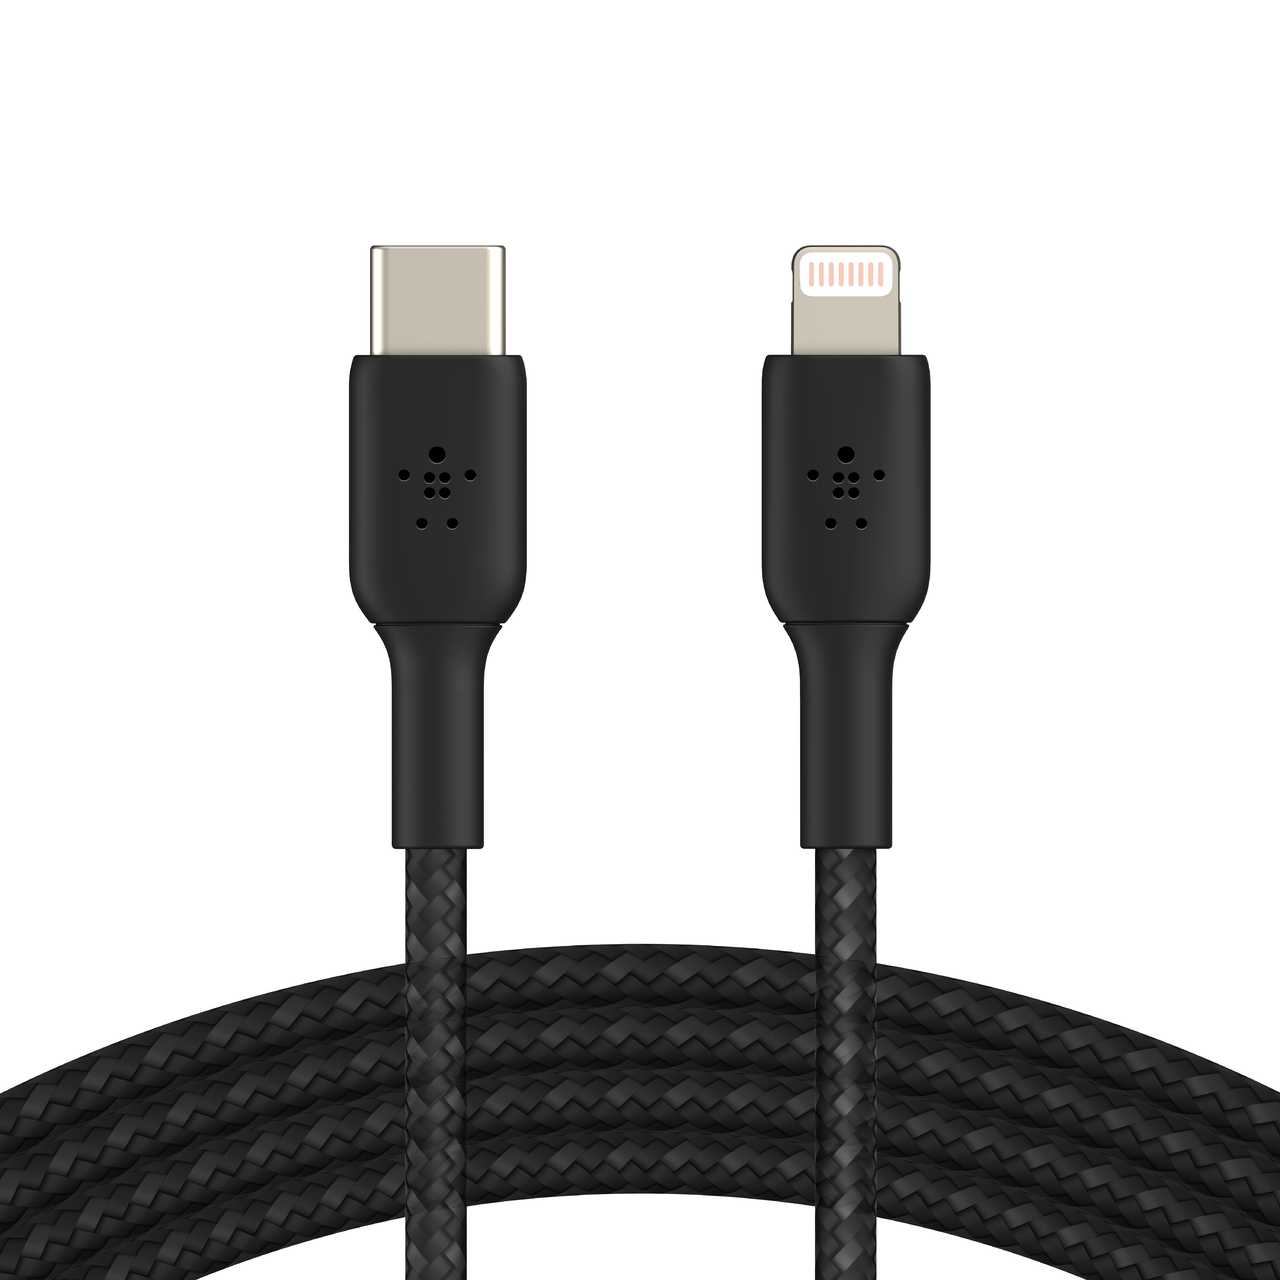 Lightning cables - Cheap Lightning cable Deals